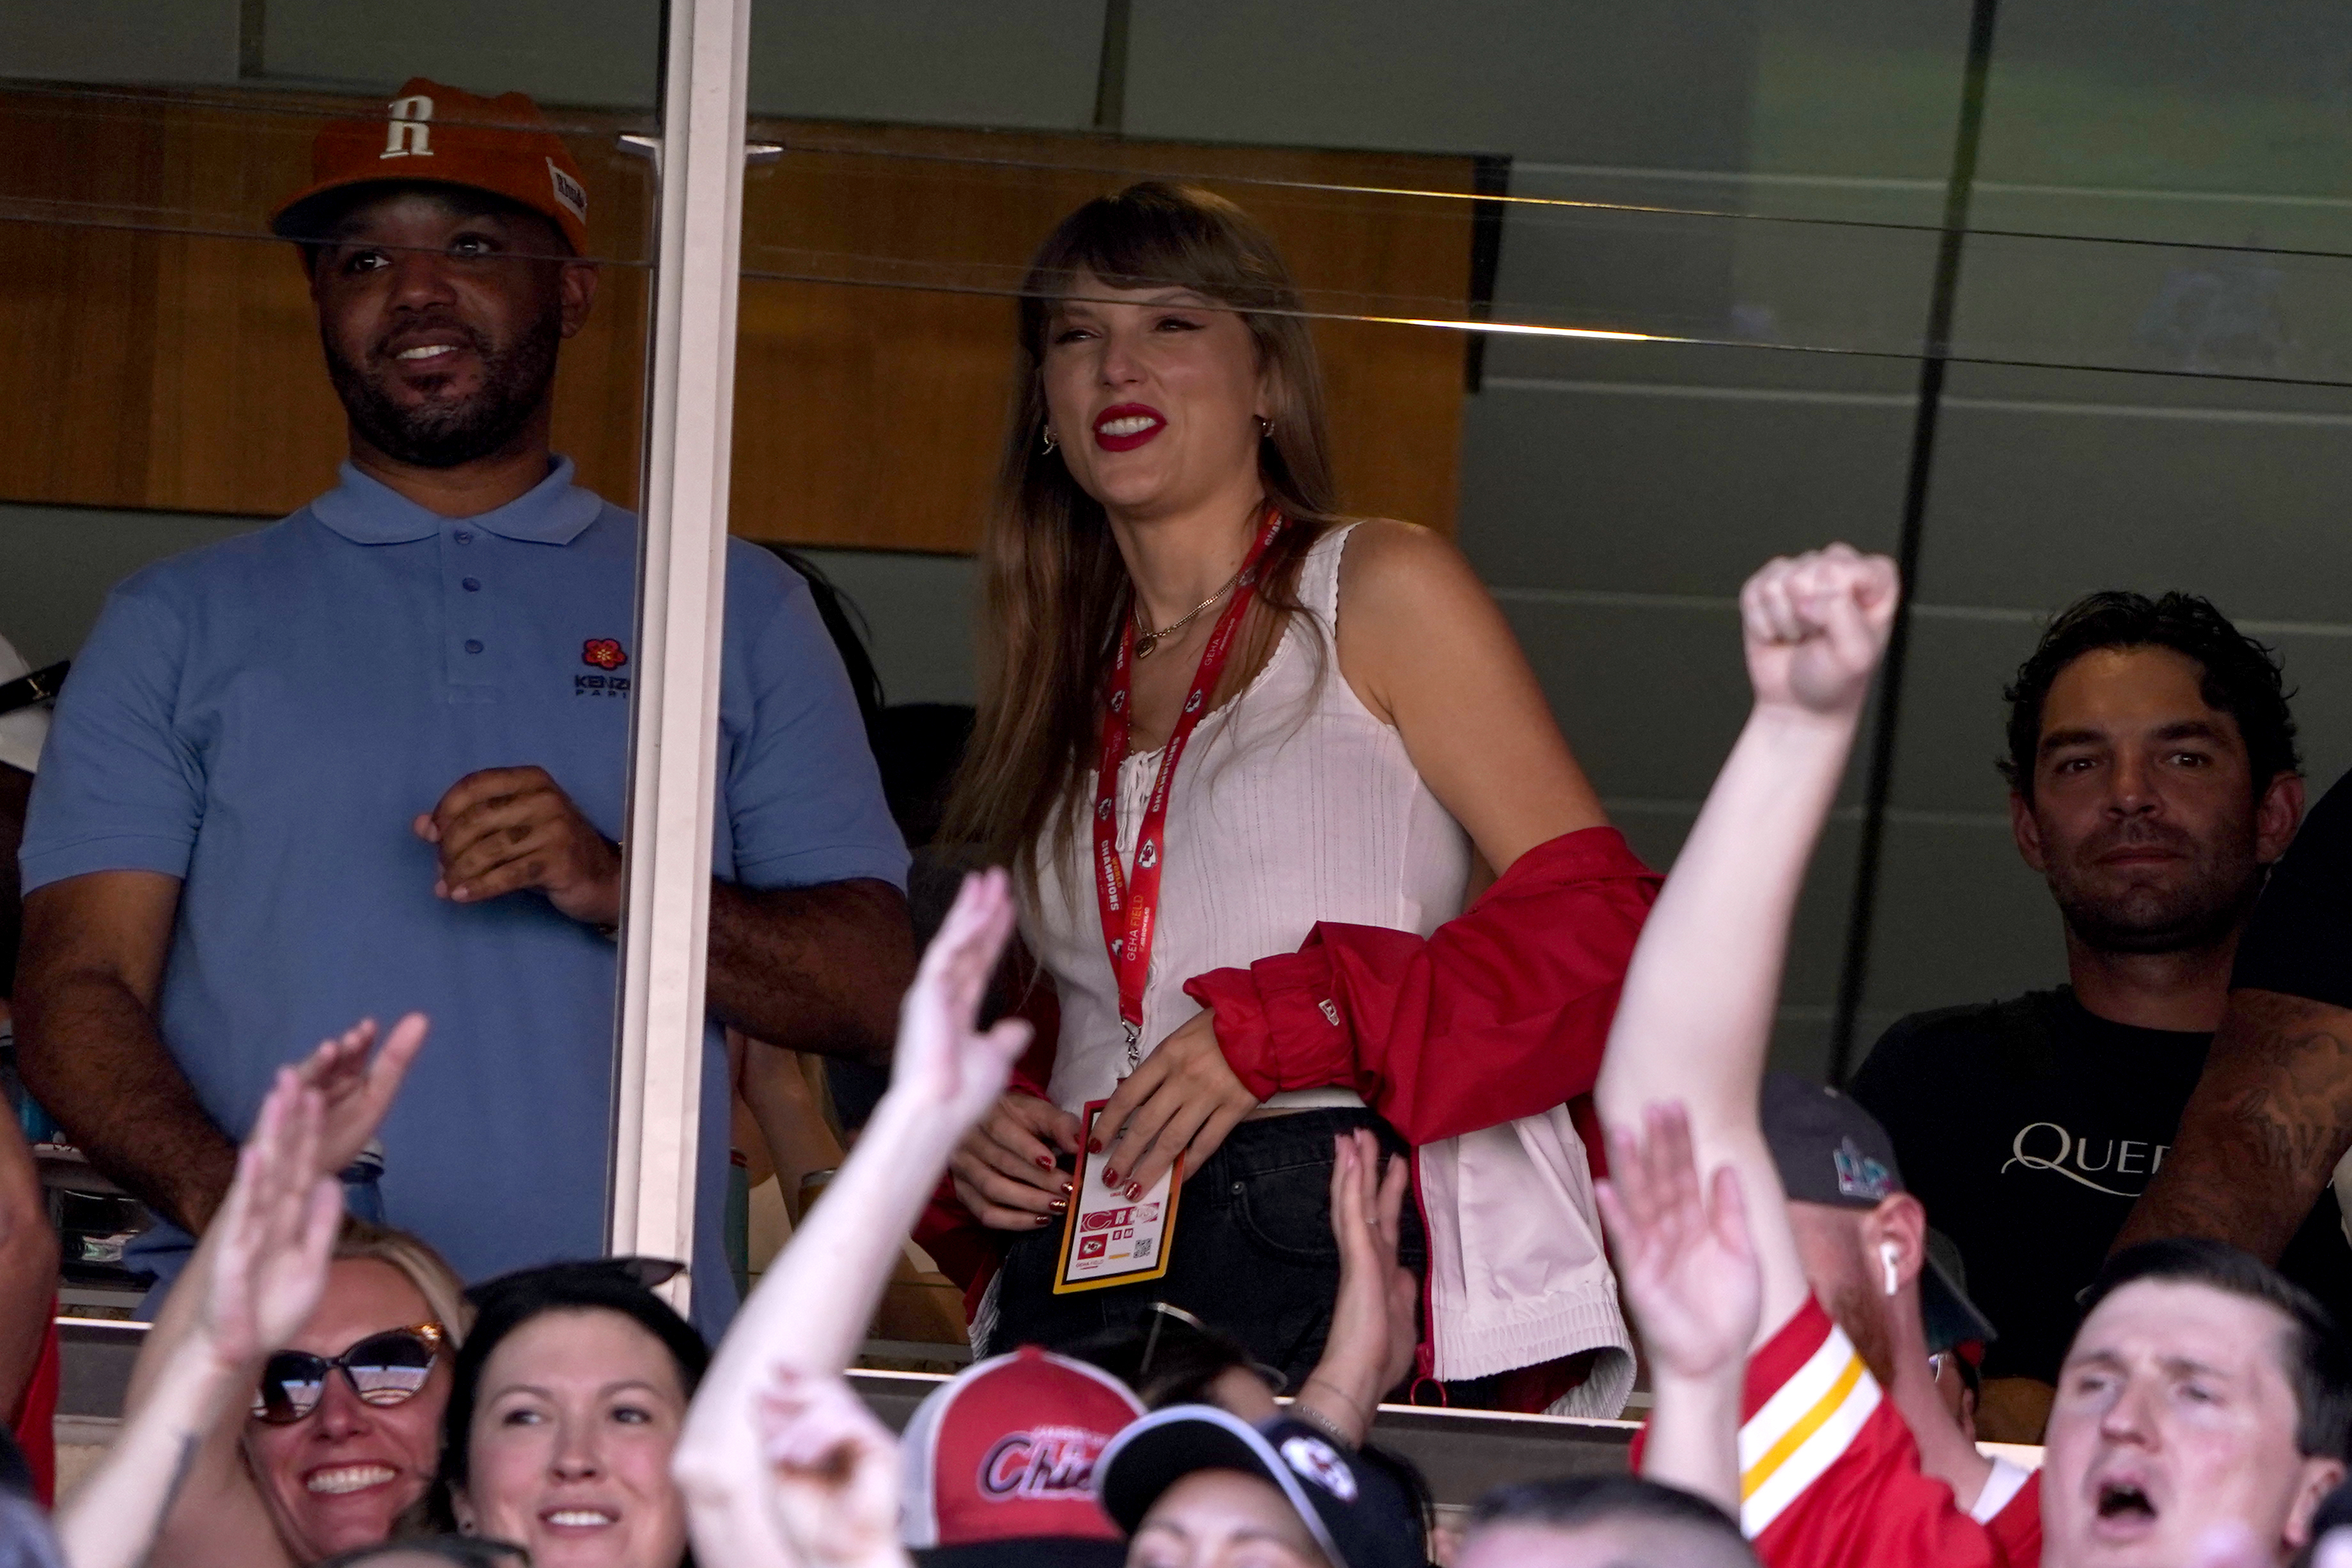 Taylor Swift at Jets game: NJ Places to visit before Chiefs play